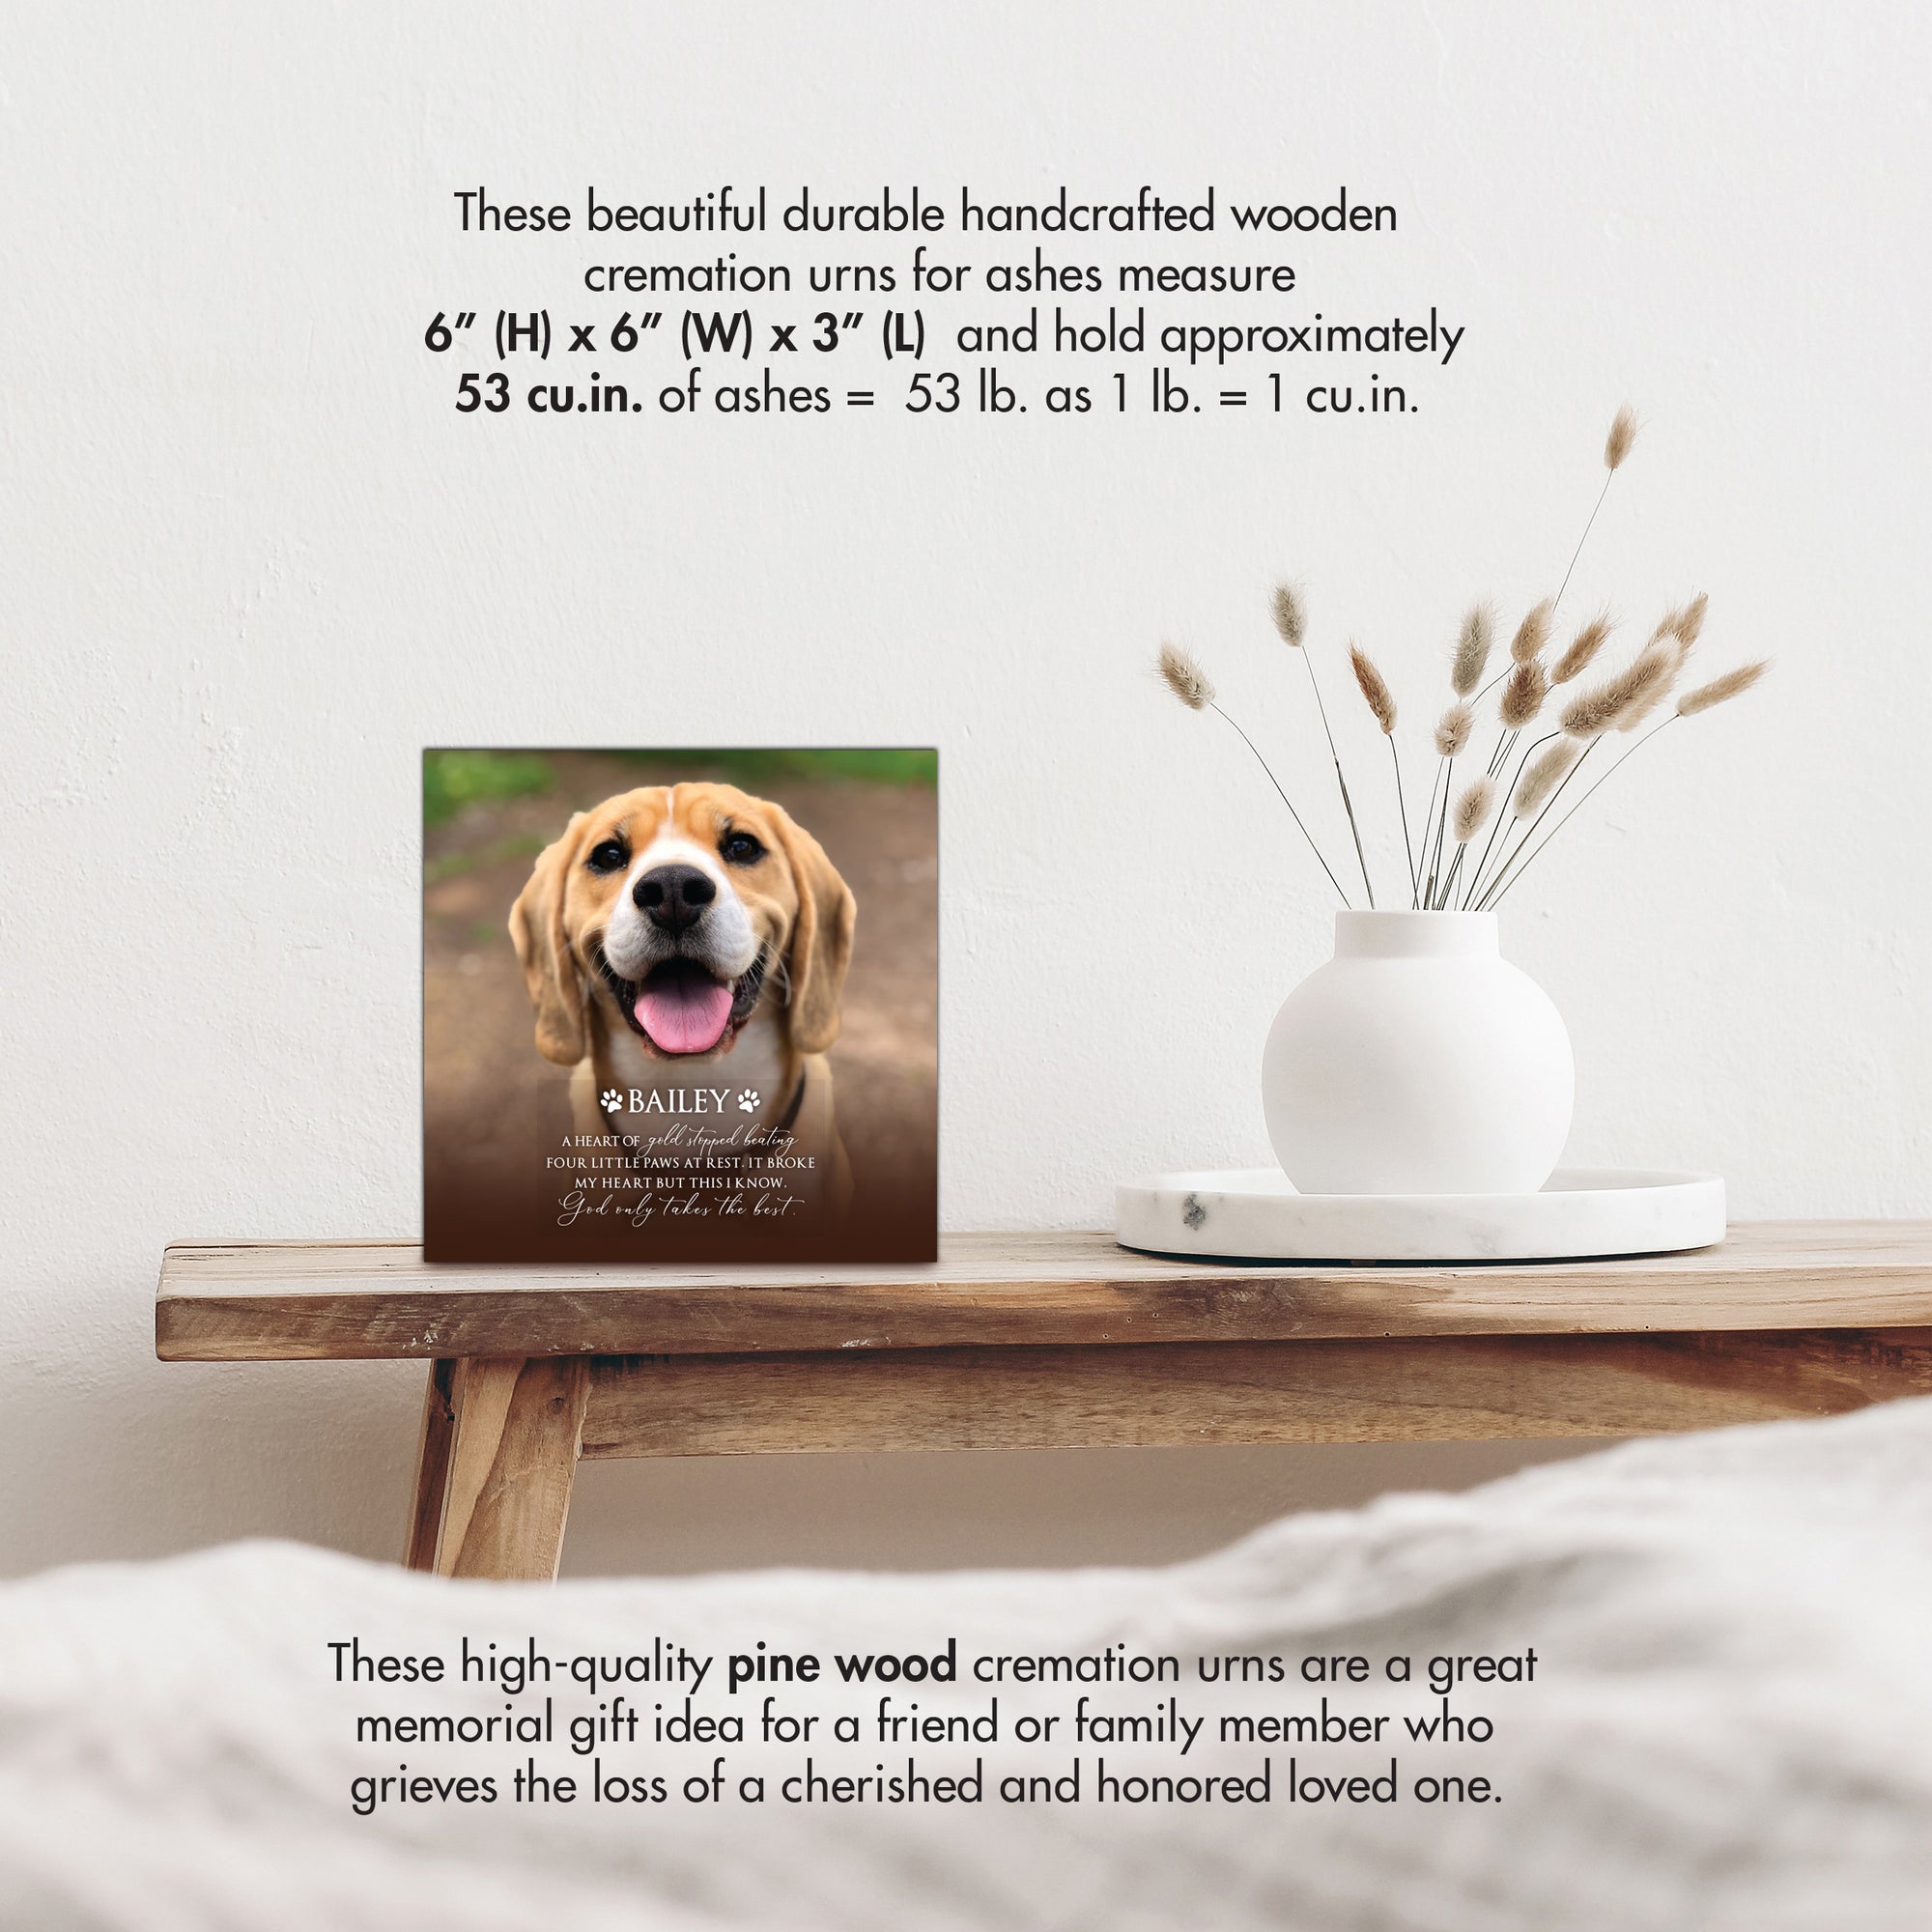 Pet Memorial Custom Photo Shadow Box Cremation Urn For Dog or Cats - A Heart Of Gold Keepsake box for ashes